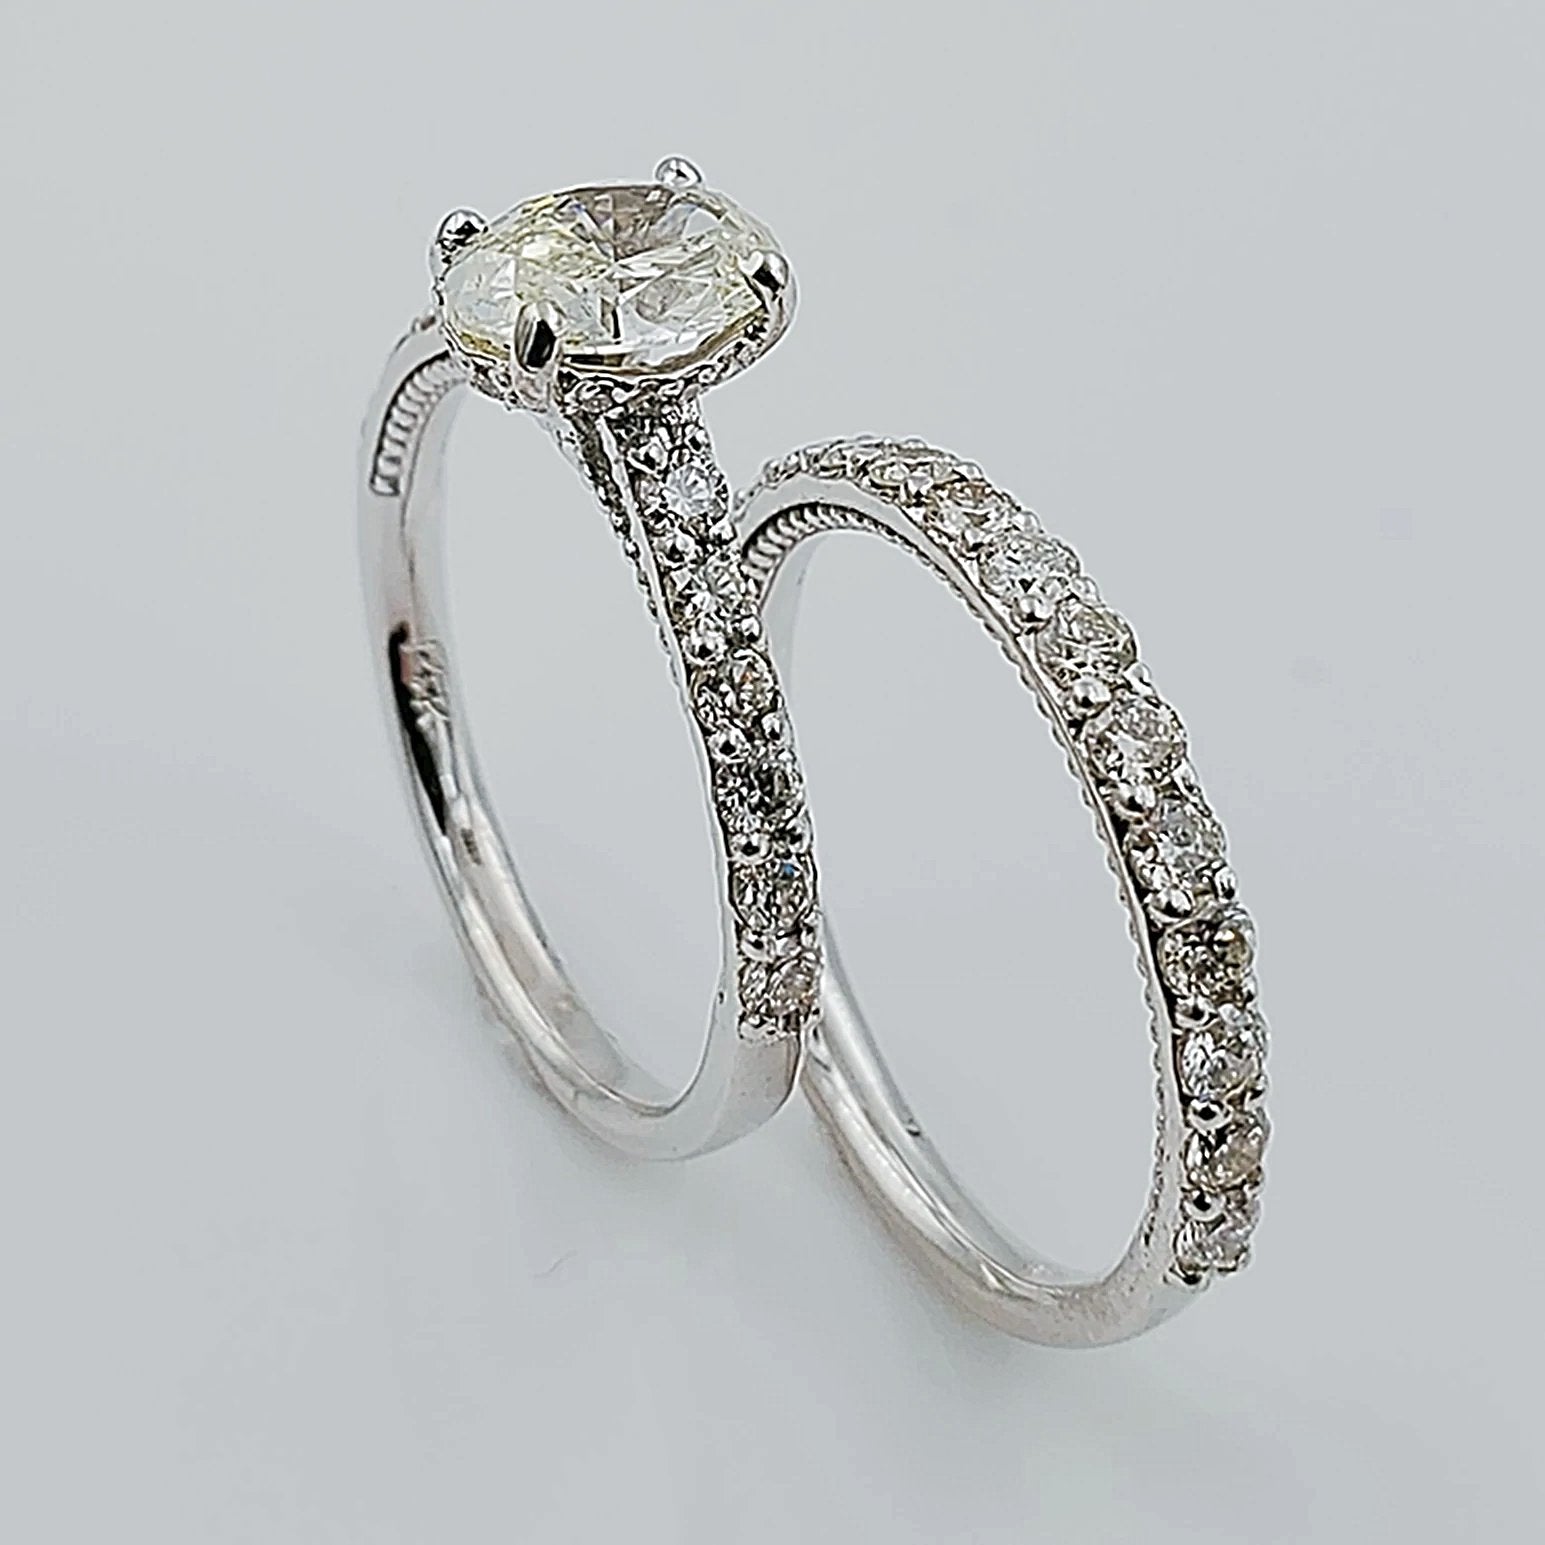 Women's 14K White Gold with Oval 0.94 CT Center (SI Color L) Diamond 4.5 GR Total Weight Bridal Ring Set. (Size: 5.5)